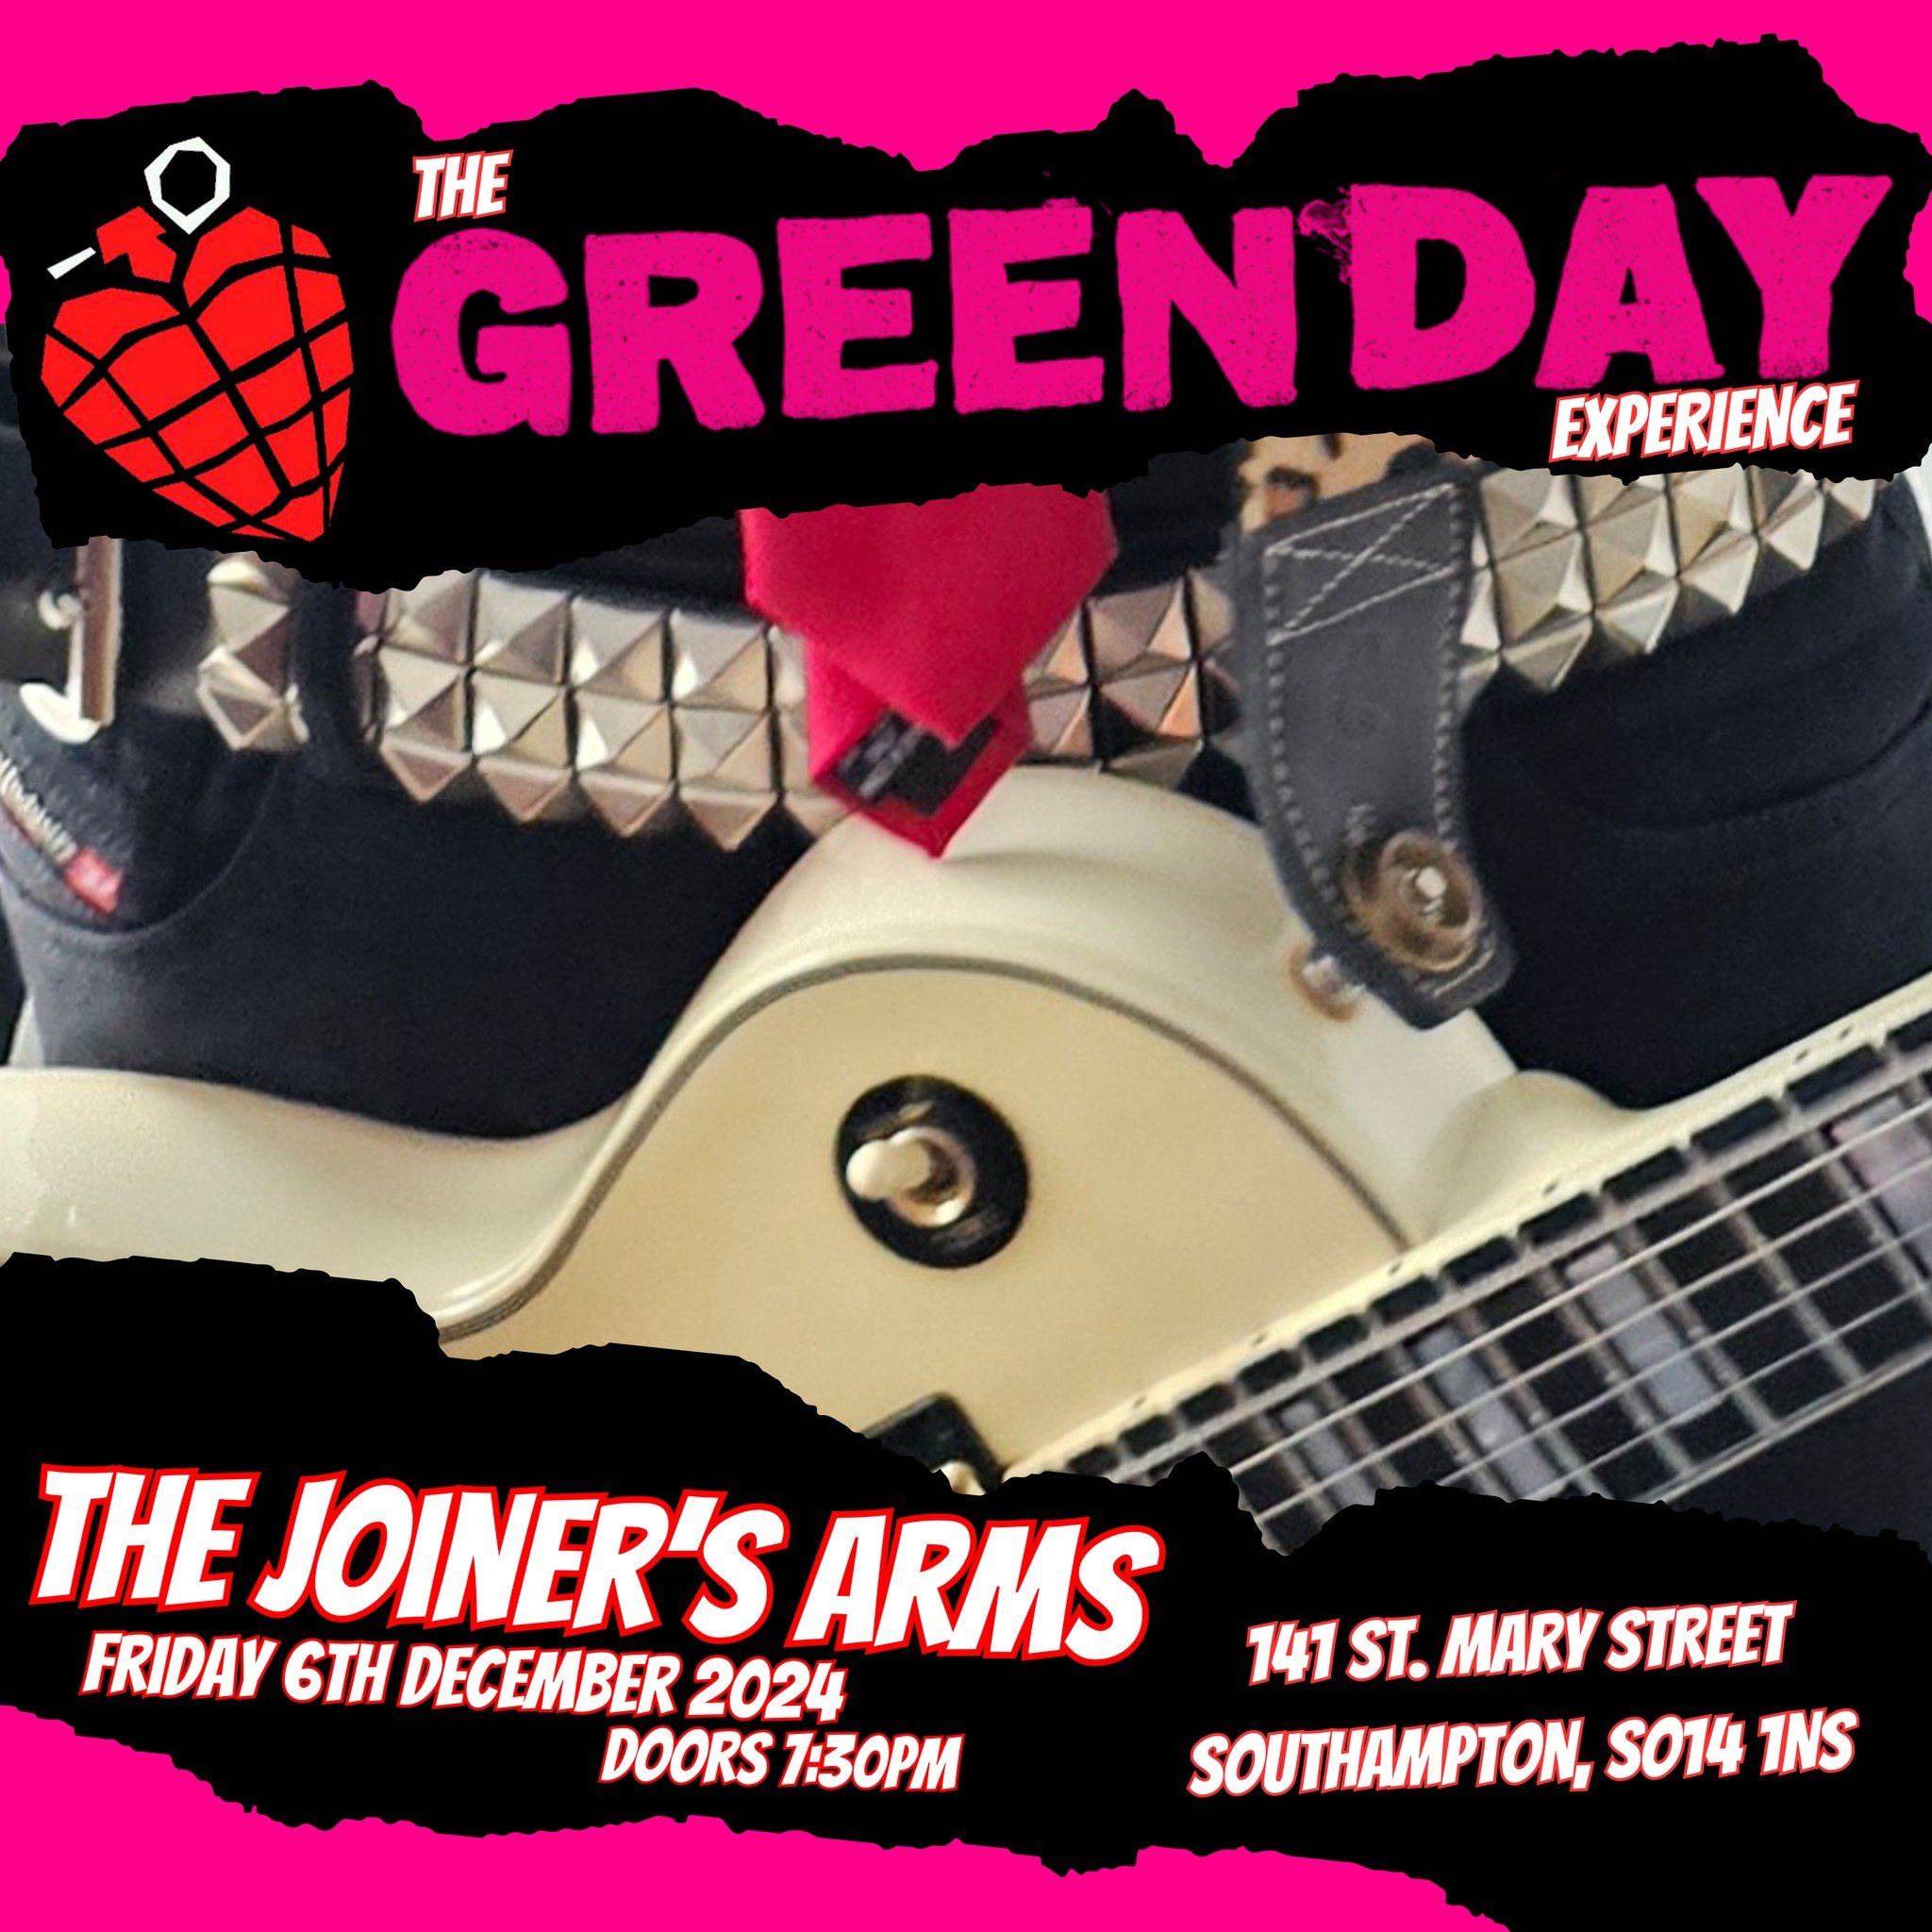 Who's coming out to see us at The Joiners In December?
#thegreendayexperience #tribute #greenday #thejoiners